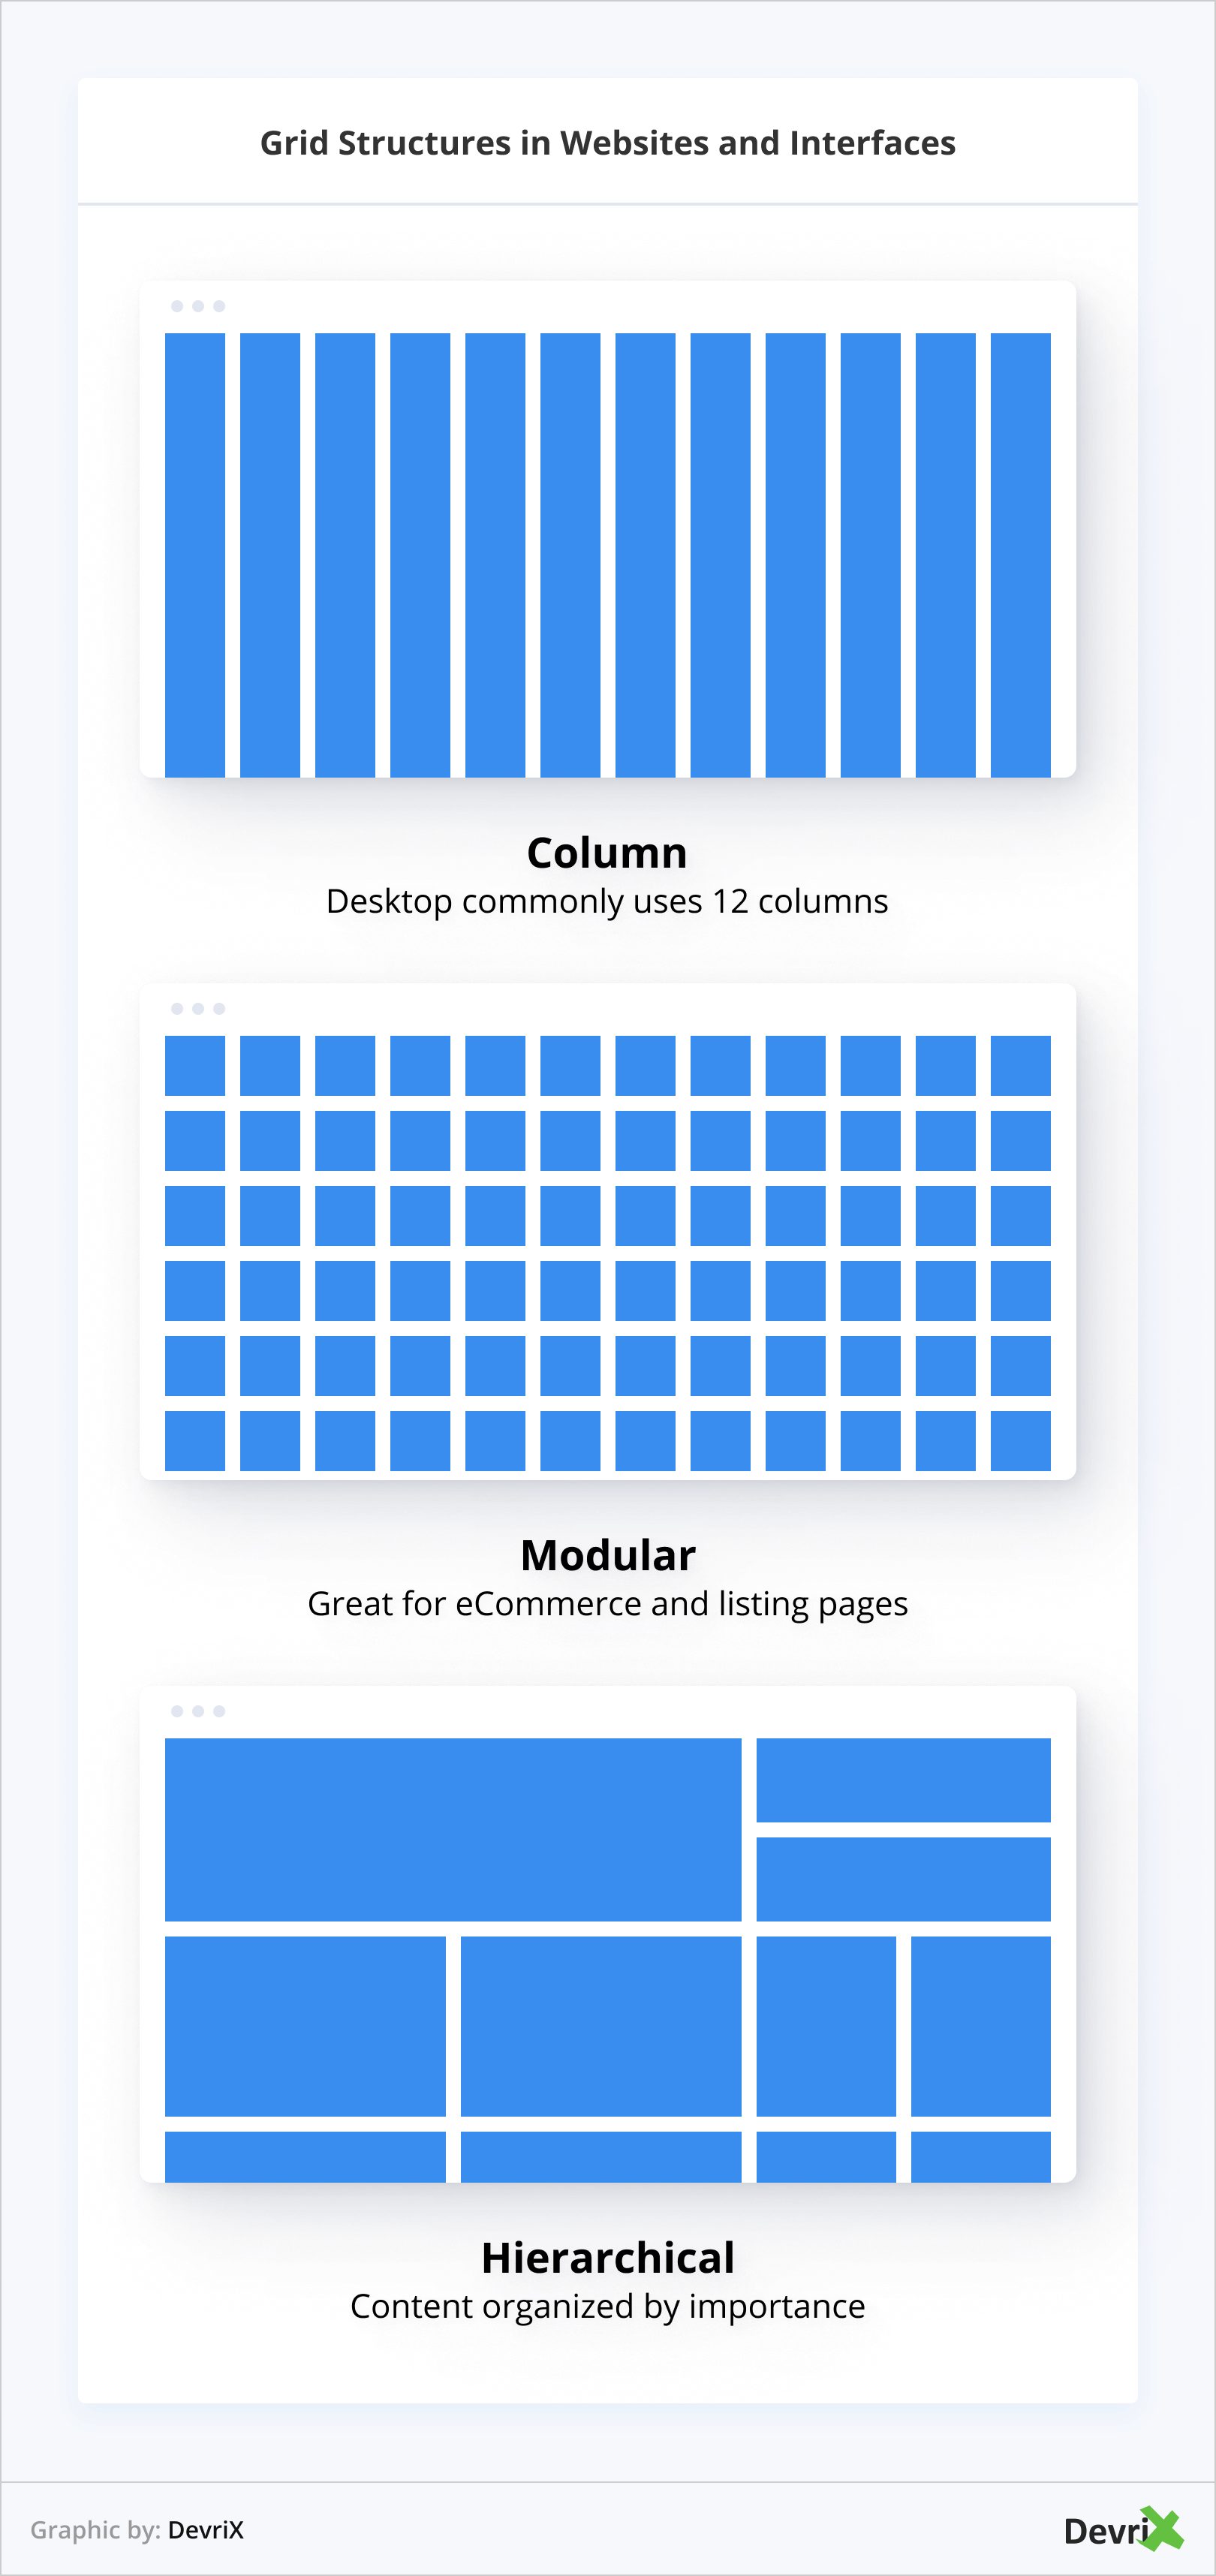 Grid Structures in Websites and Interfaces